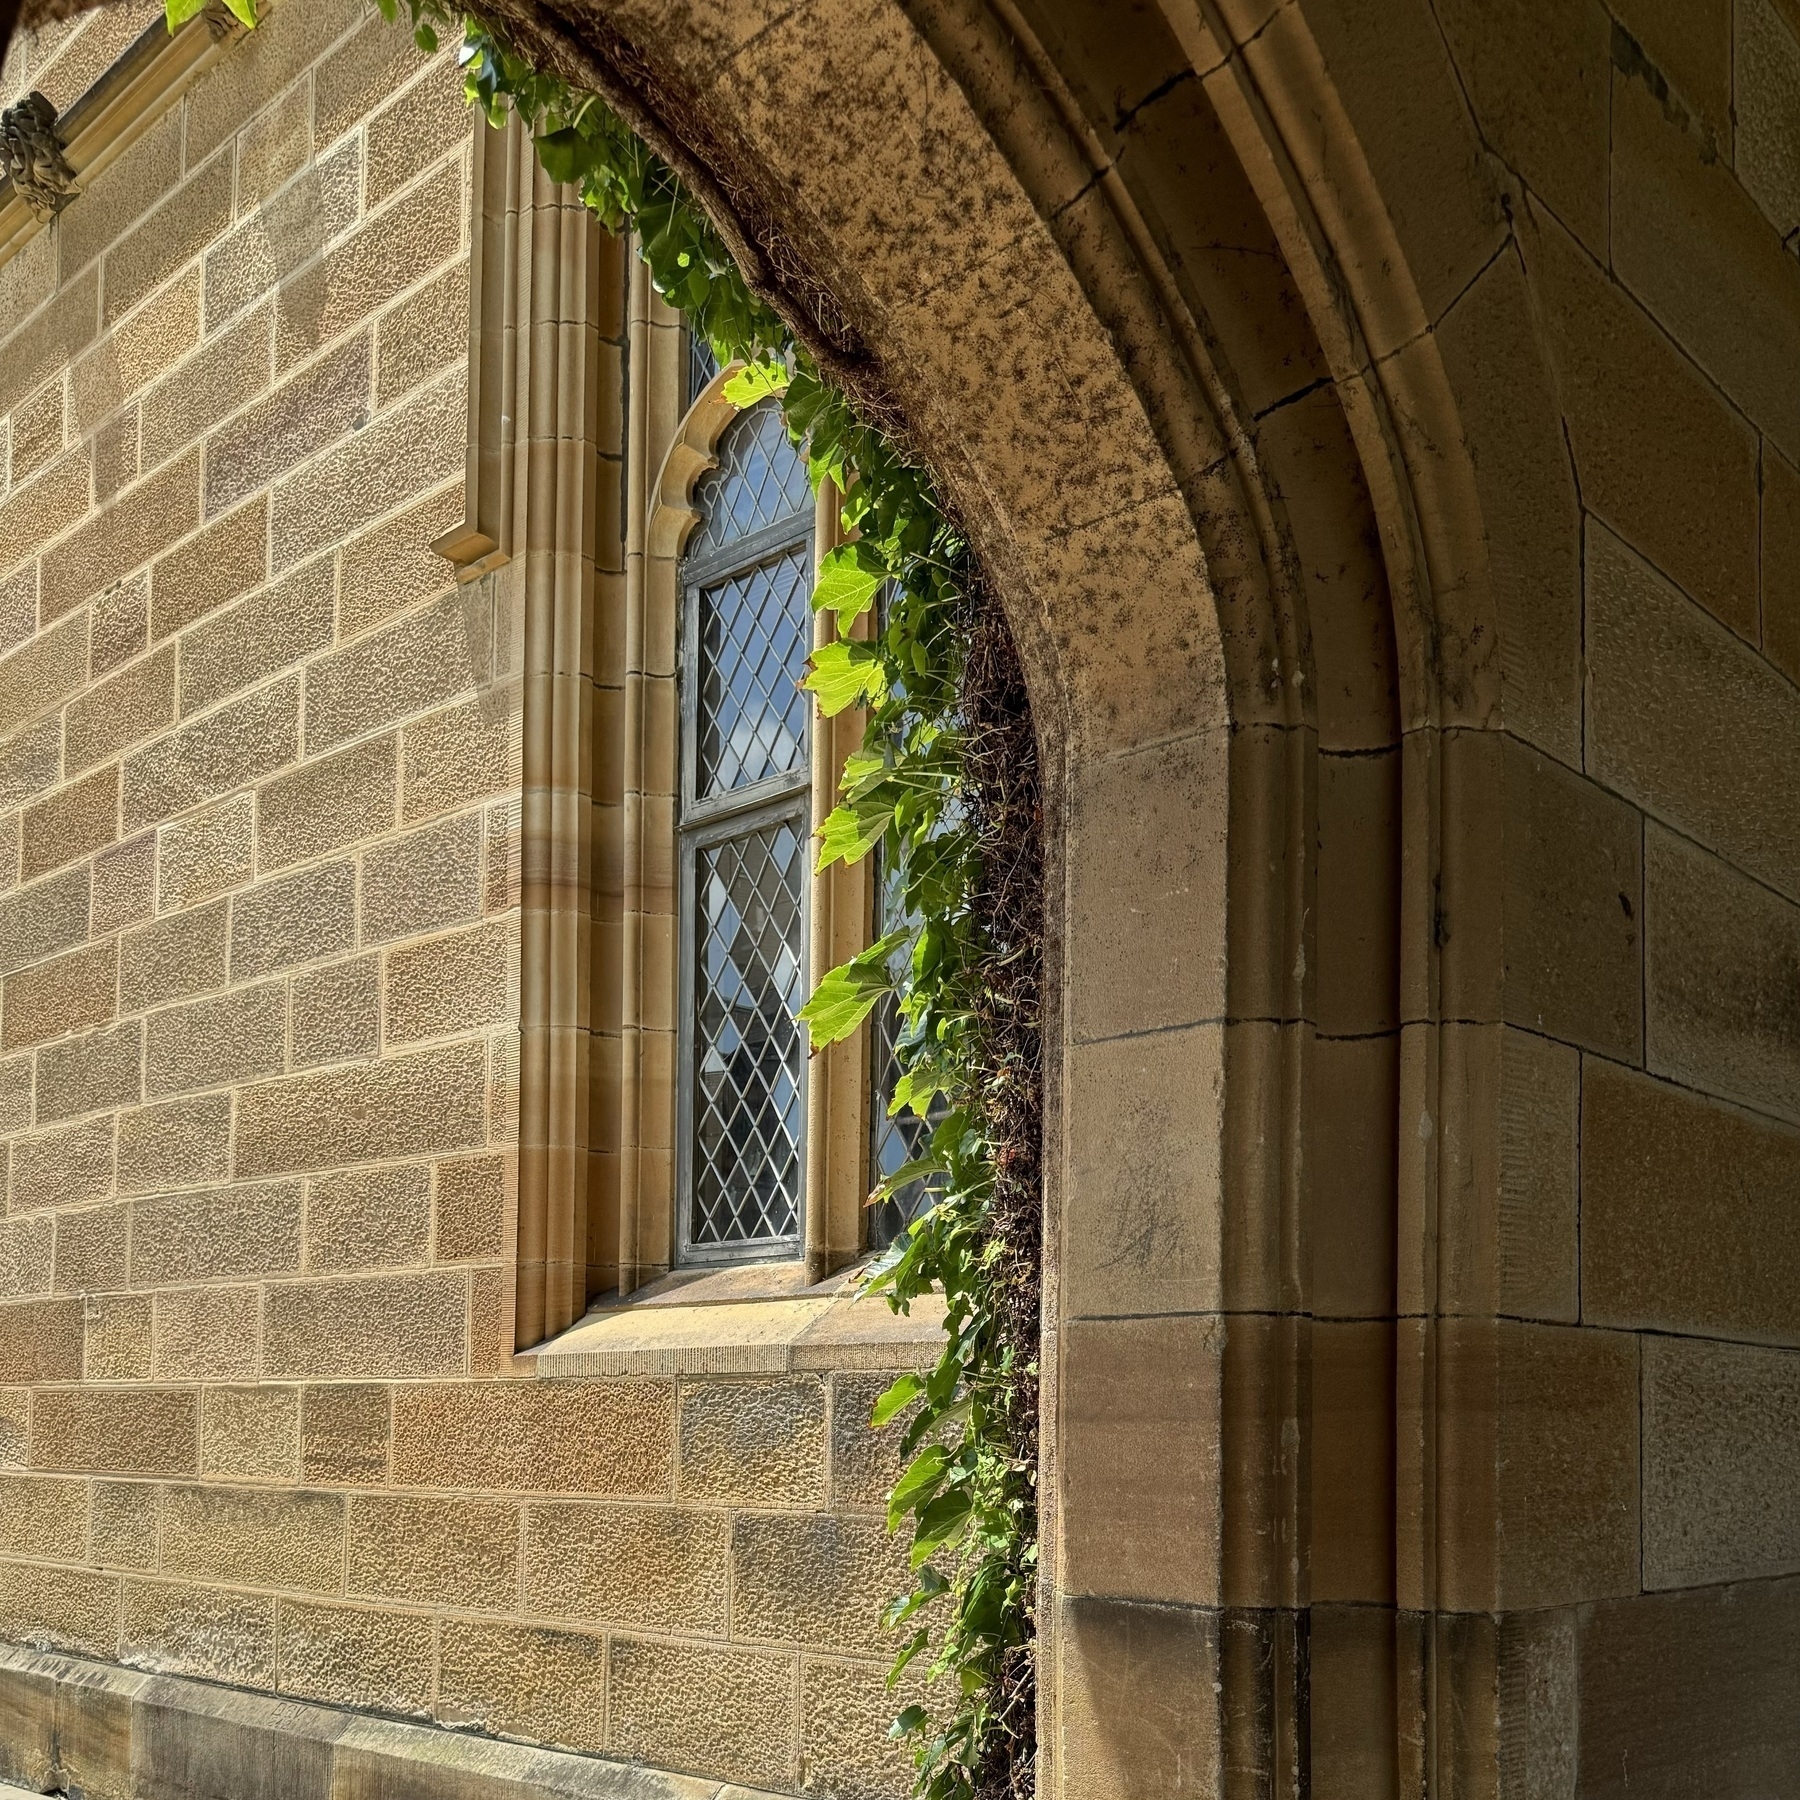 A window in a sandstone wall partially obscured by a stone arch with leaves growing along it.